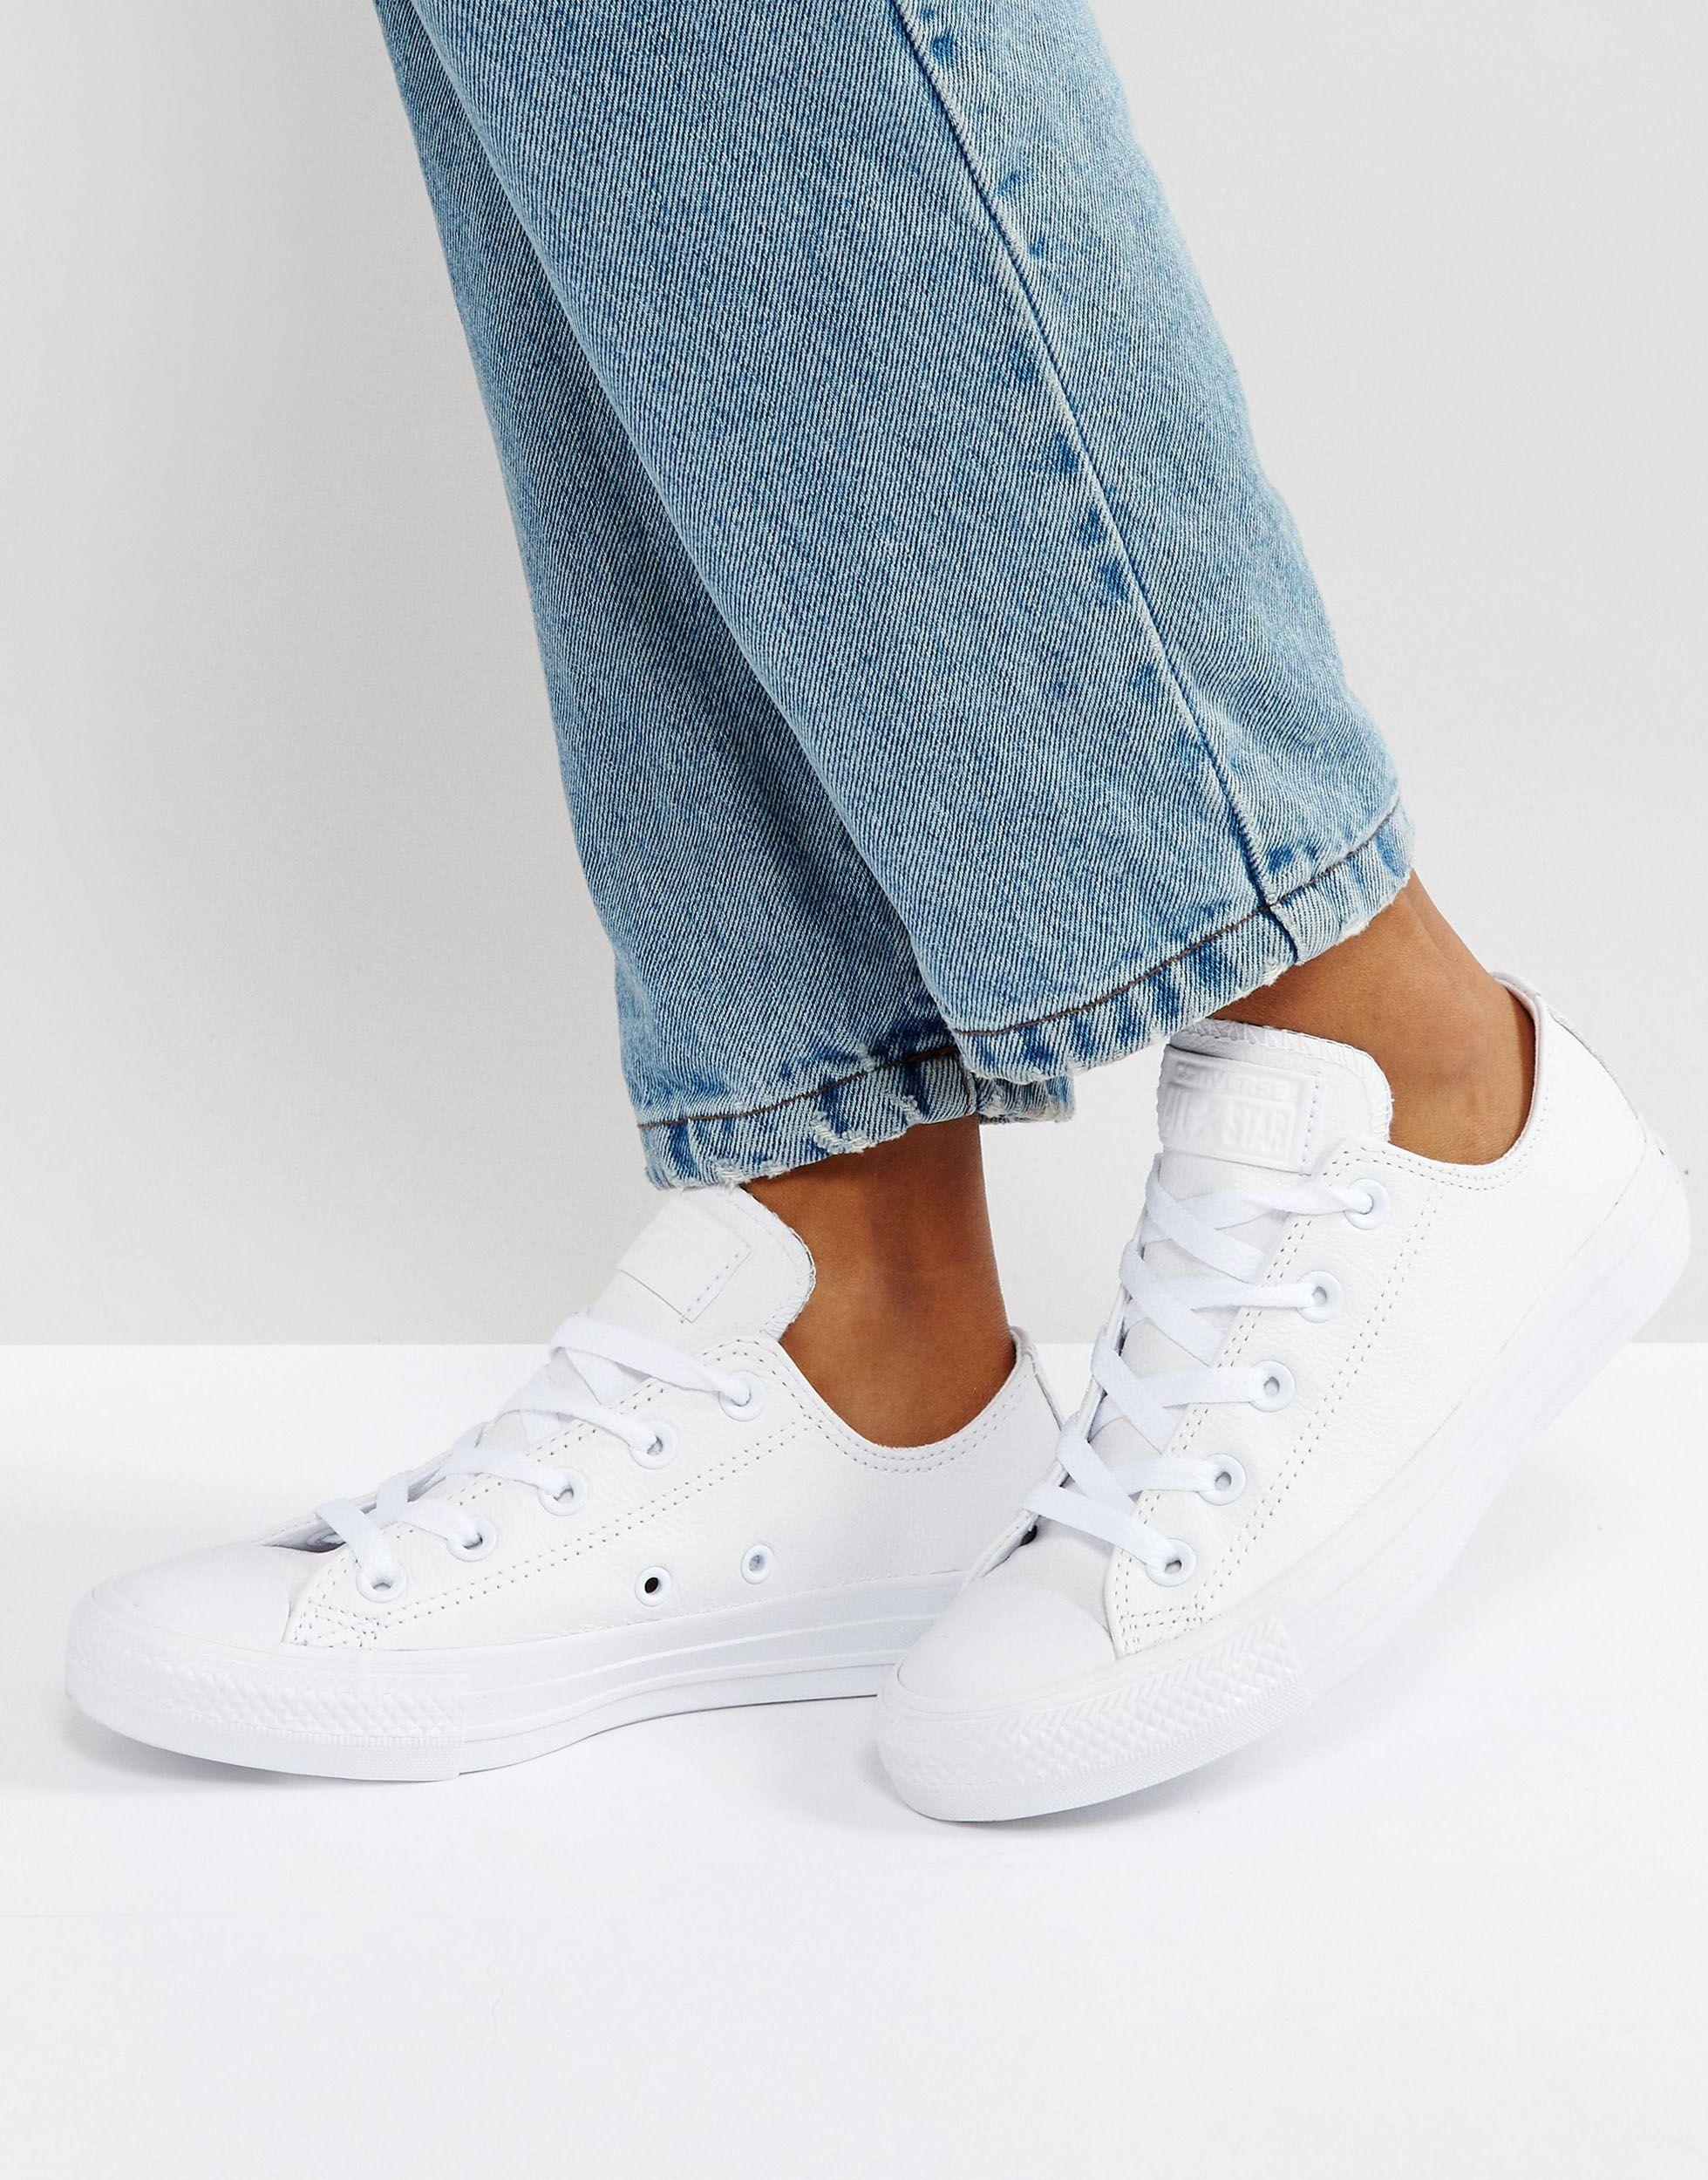 Converse Chuck Taylor Ox Leather Monochrome Sneakers in White | Lyst Canada